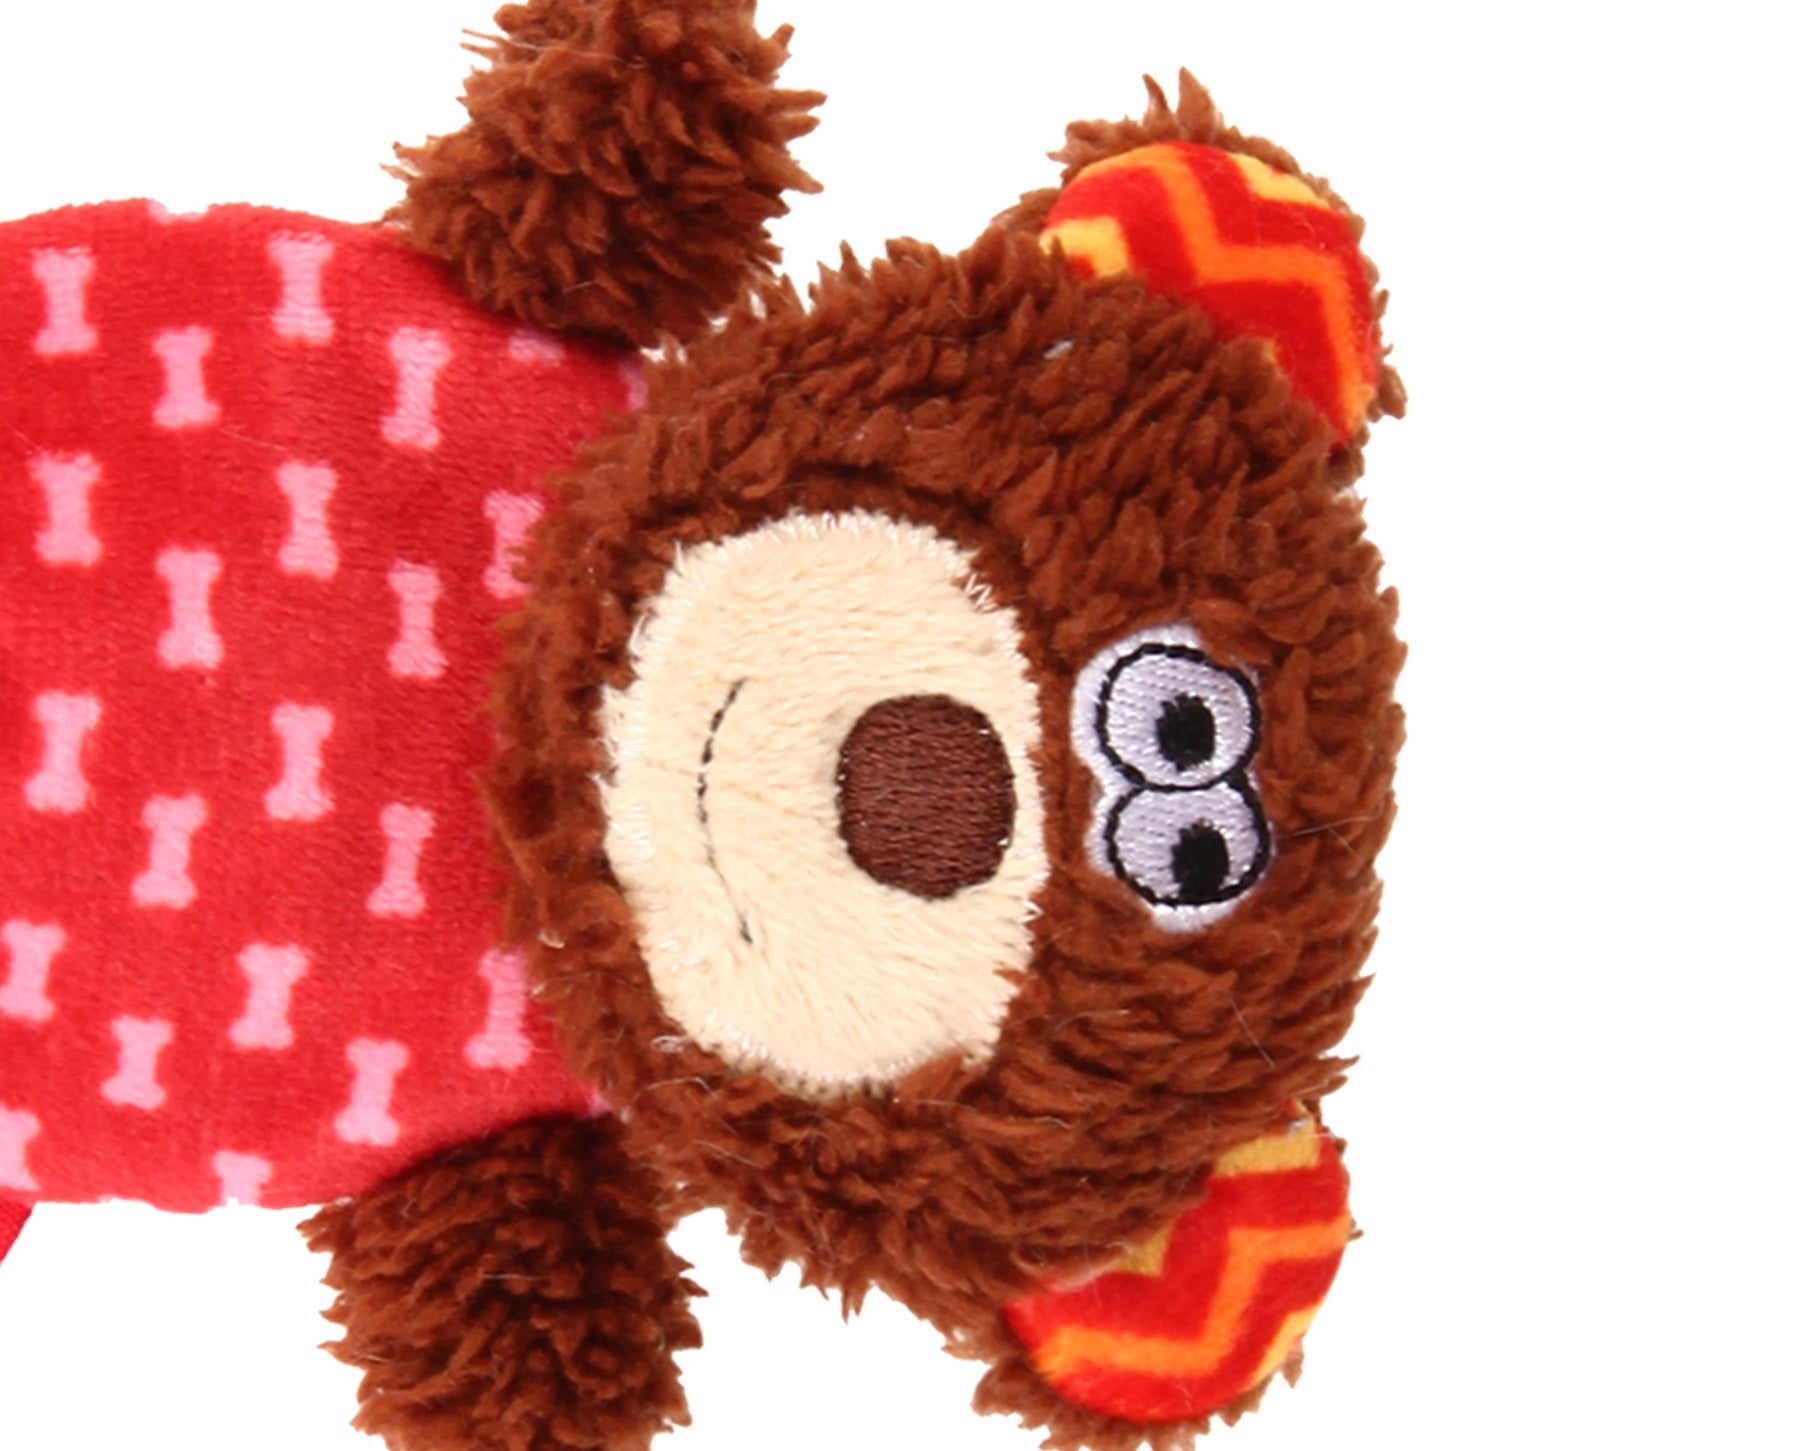 Gigwi Bear Plush Friendz With Refillable Squeaker Dog Toy - Brown/Red